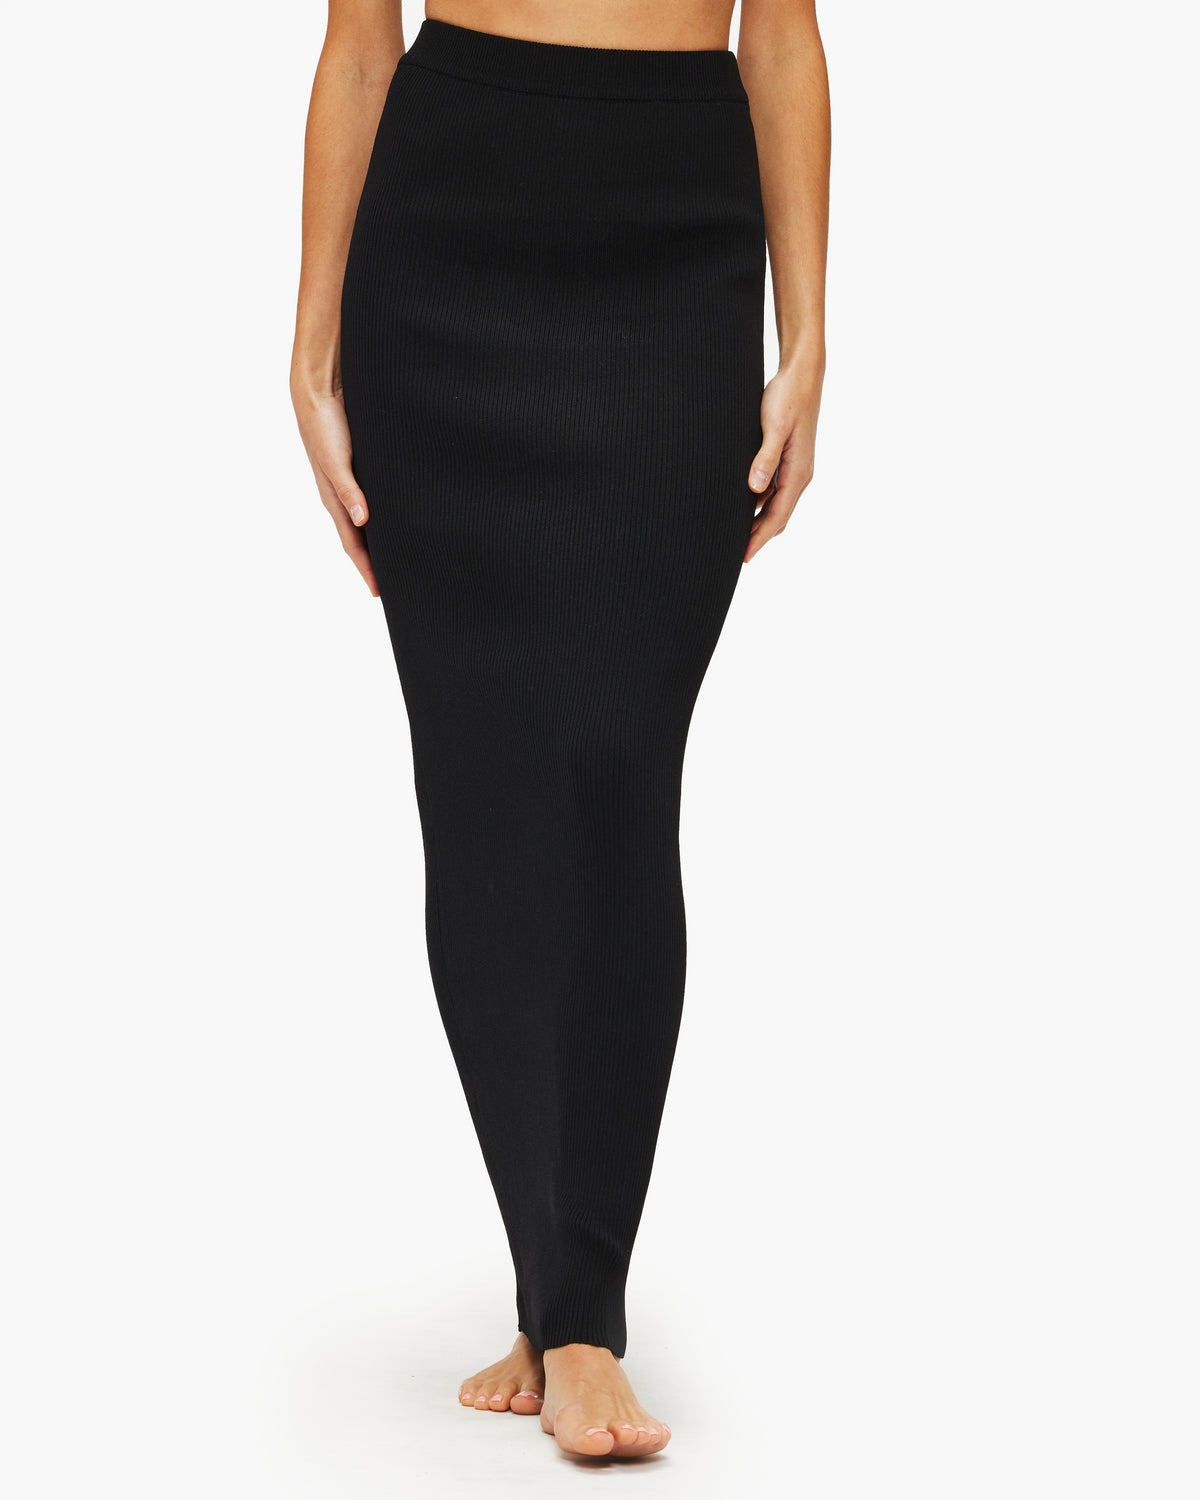 Lululemon Pace Rival Mid-Rise Skirt – The Shop at Equinox